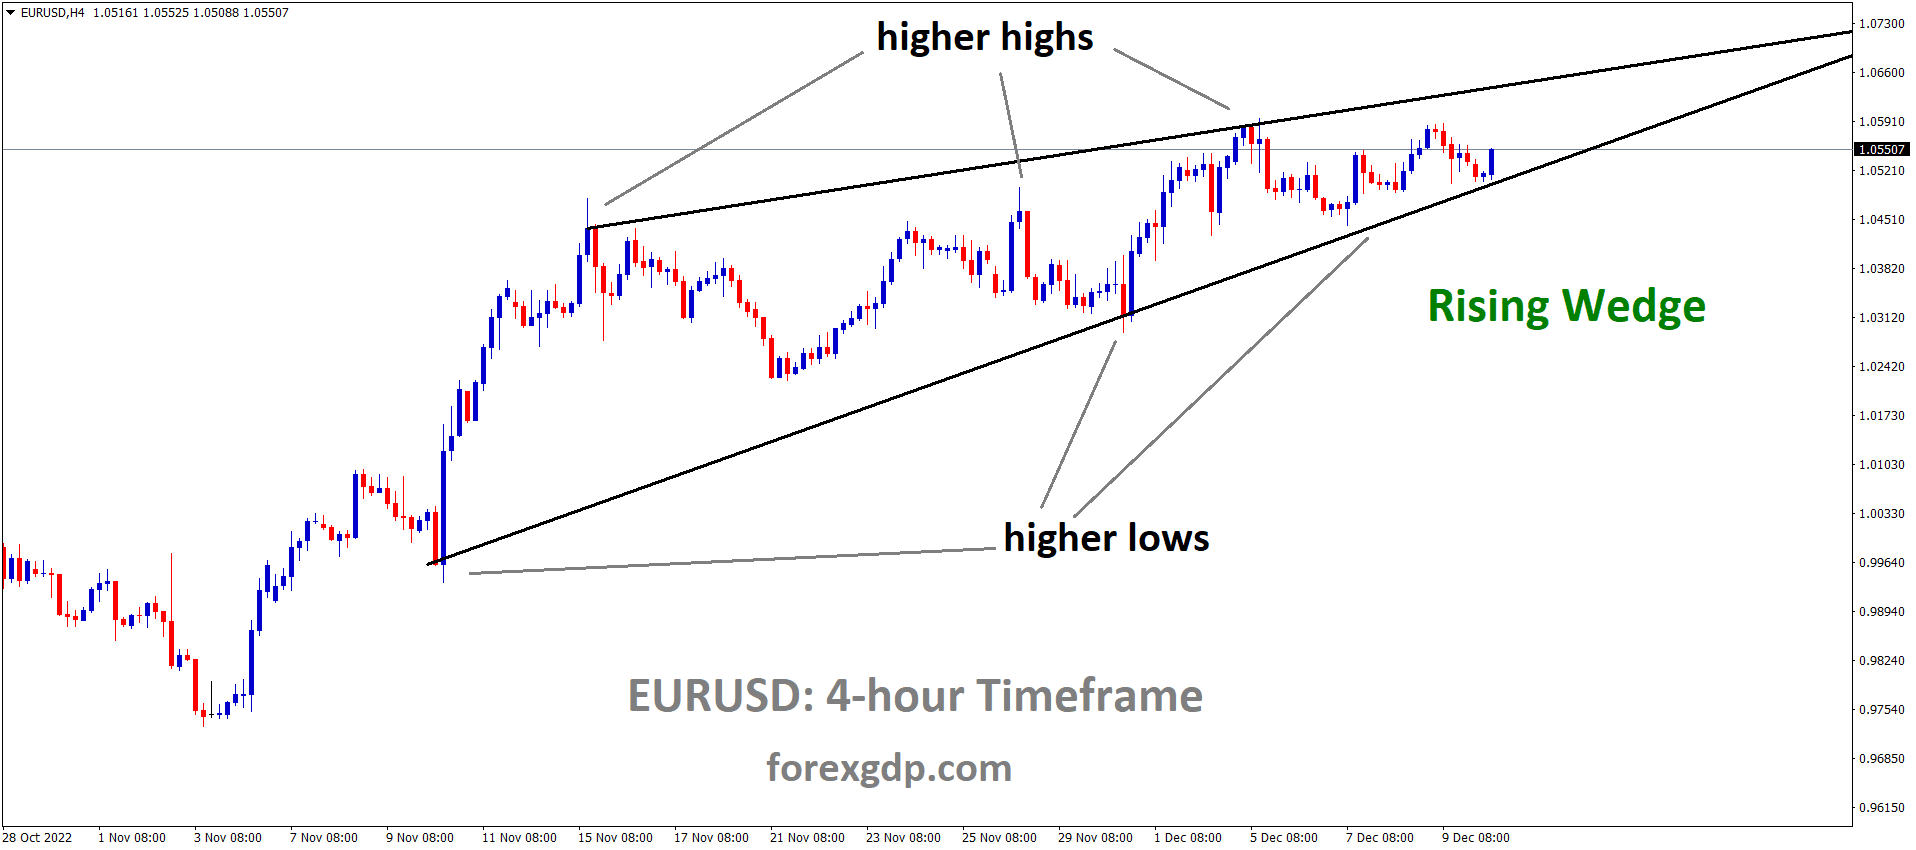 EURUSD is moving in the Rising wedge pattern and the market has rebounded from the higher low area of the pattern